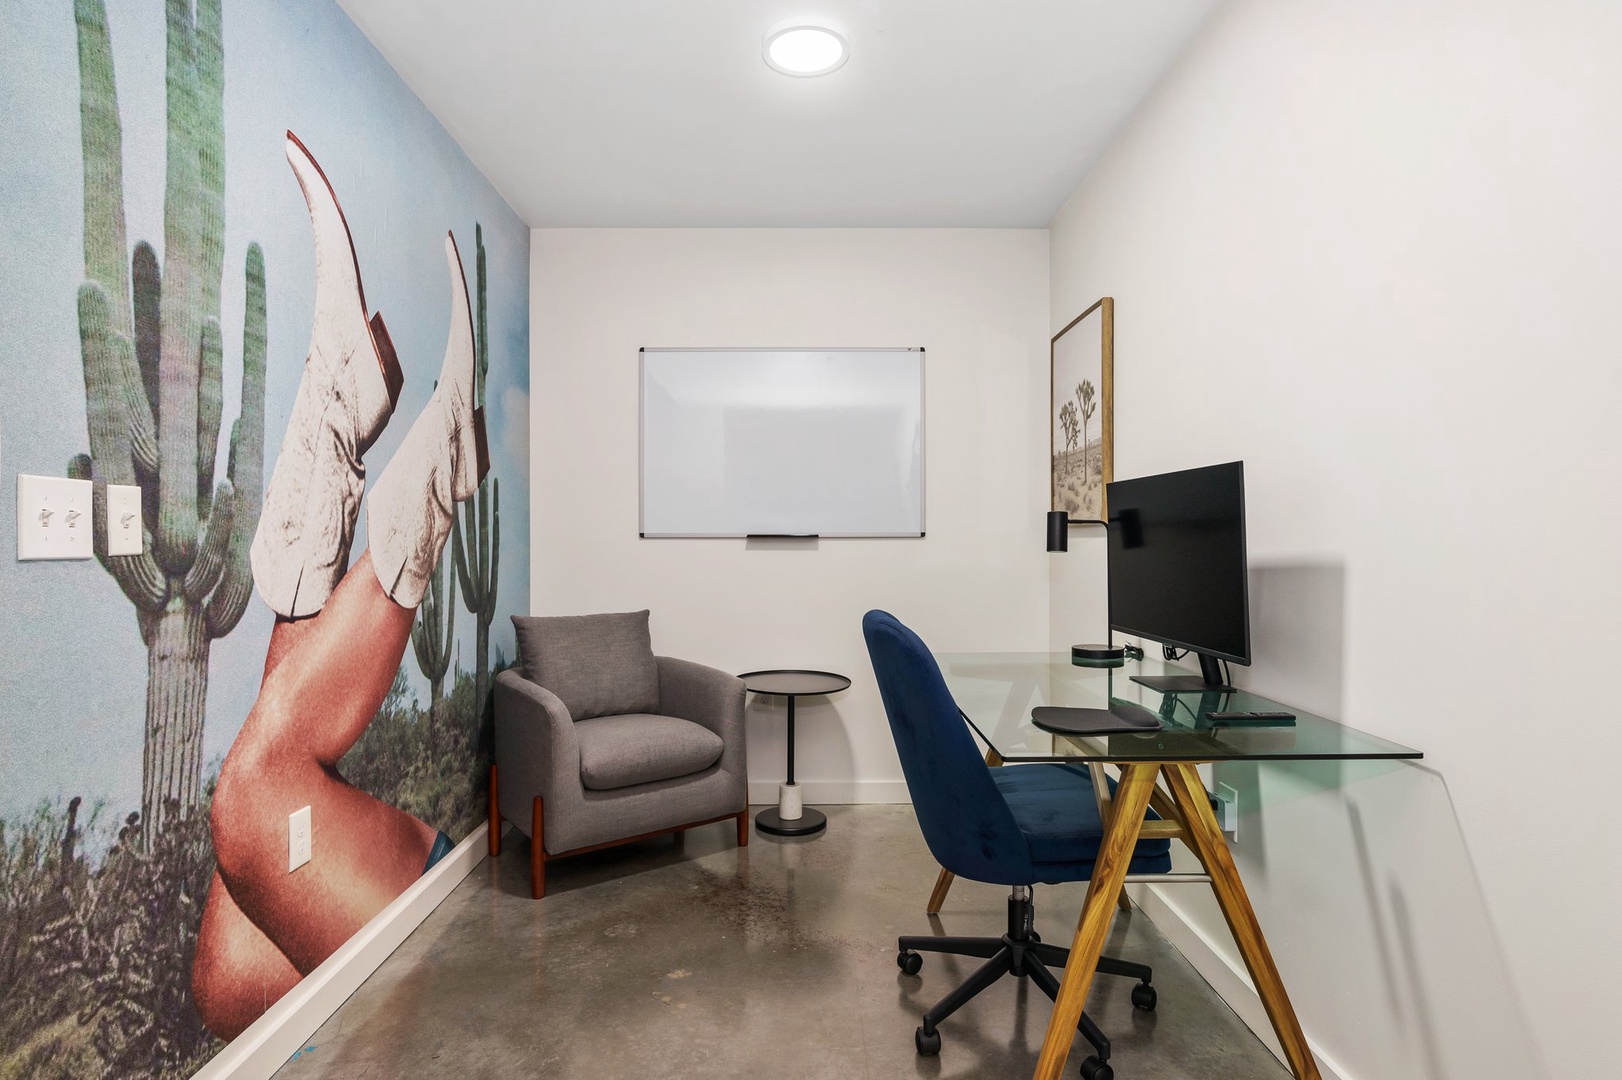 Participate in video calls in the peaceful Zoom room adorned with a mural.